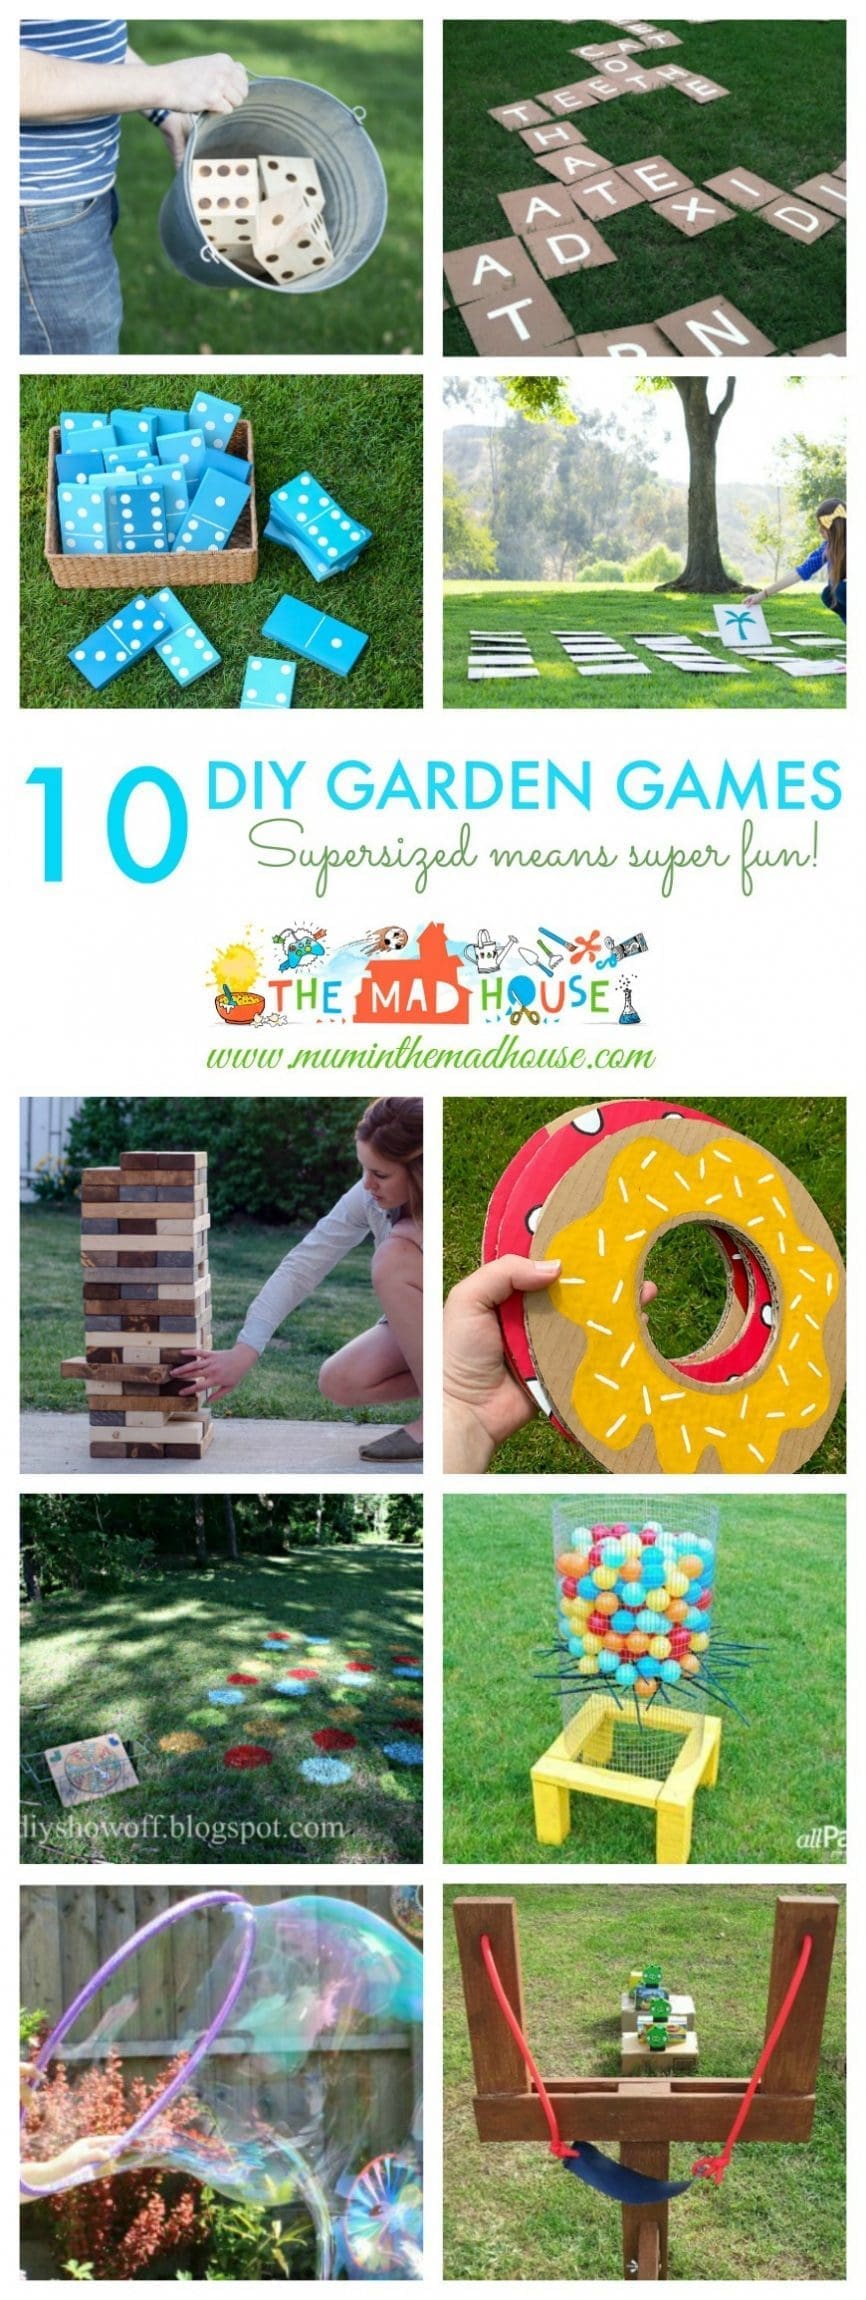 10 DIY Giant Garden Games - supersized means super fun for these amazing backyard and garden games. They are perfect for a family night or for weddings and parties. Children and adults alike will have so much fun playing these garden games.